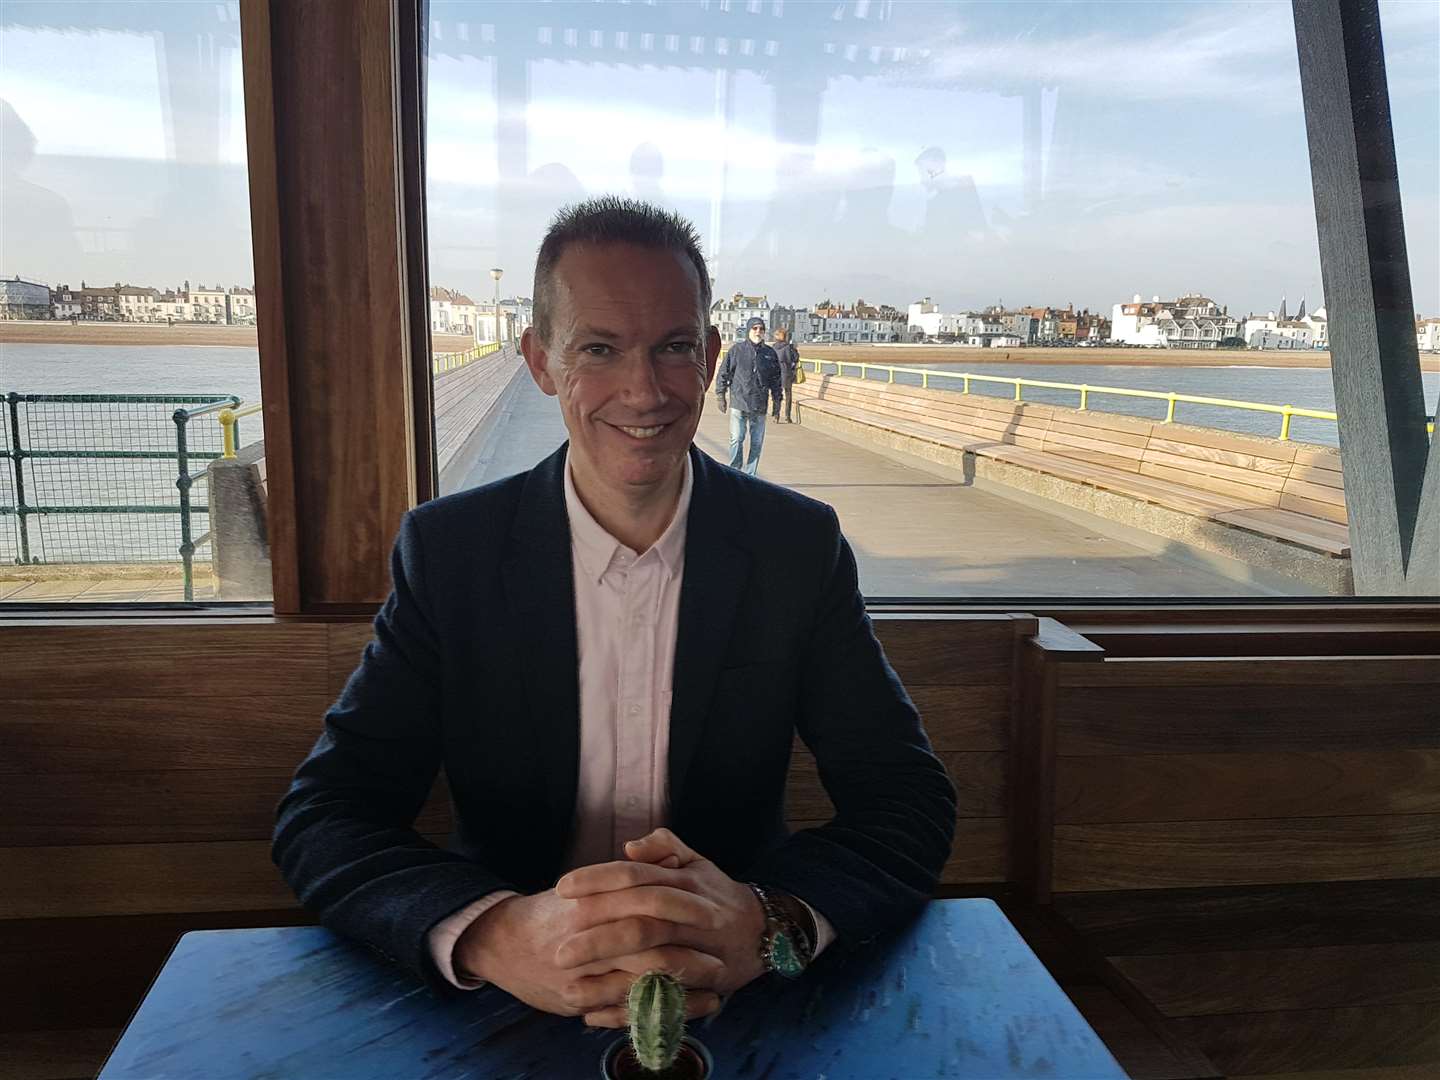 Dover District Council's portfolio holder for property management and environmental health Cllr Trevor Bartlett has played an important role in pushing through the pier project